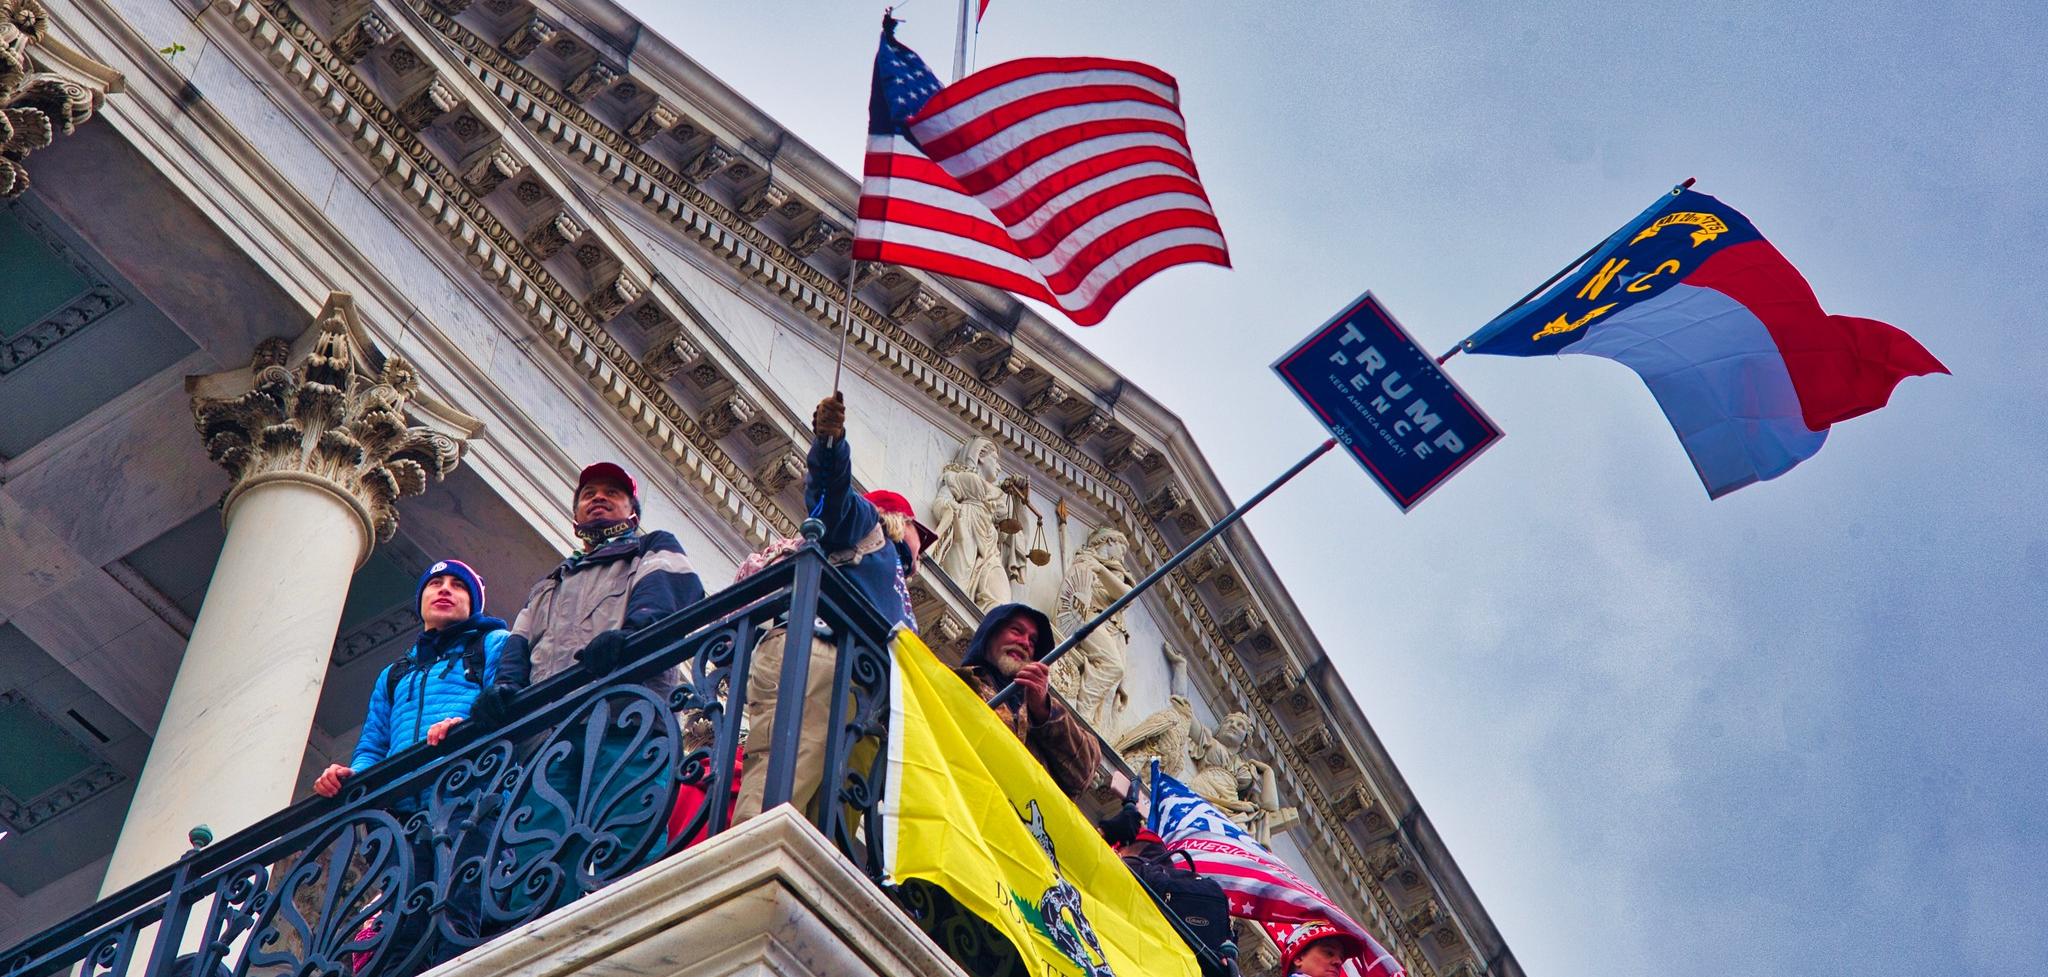 A U.S Flag, A Trump and Pence flag and other flags flying from the balcony of the Capitol building.